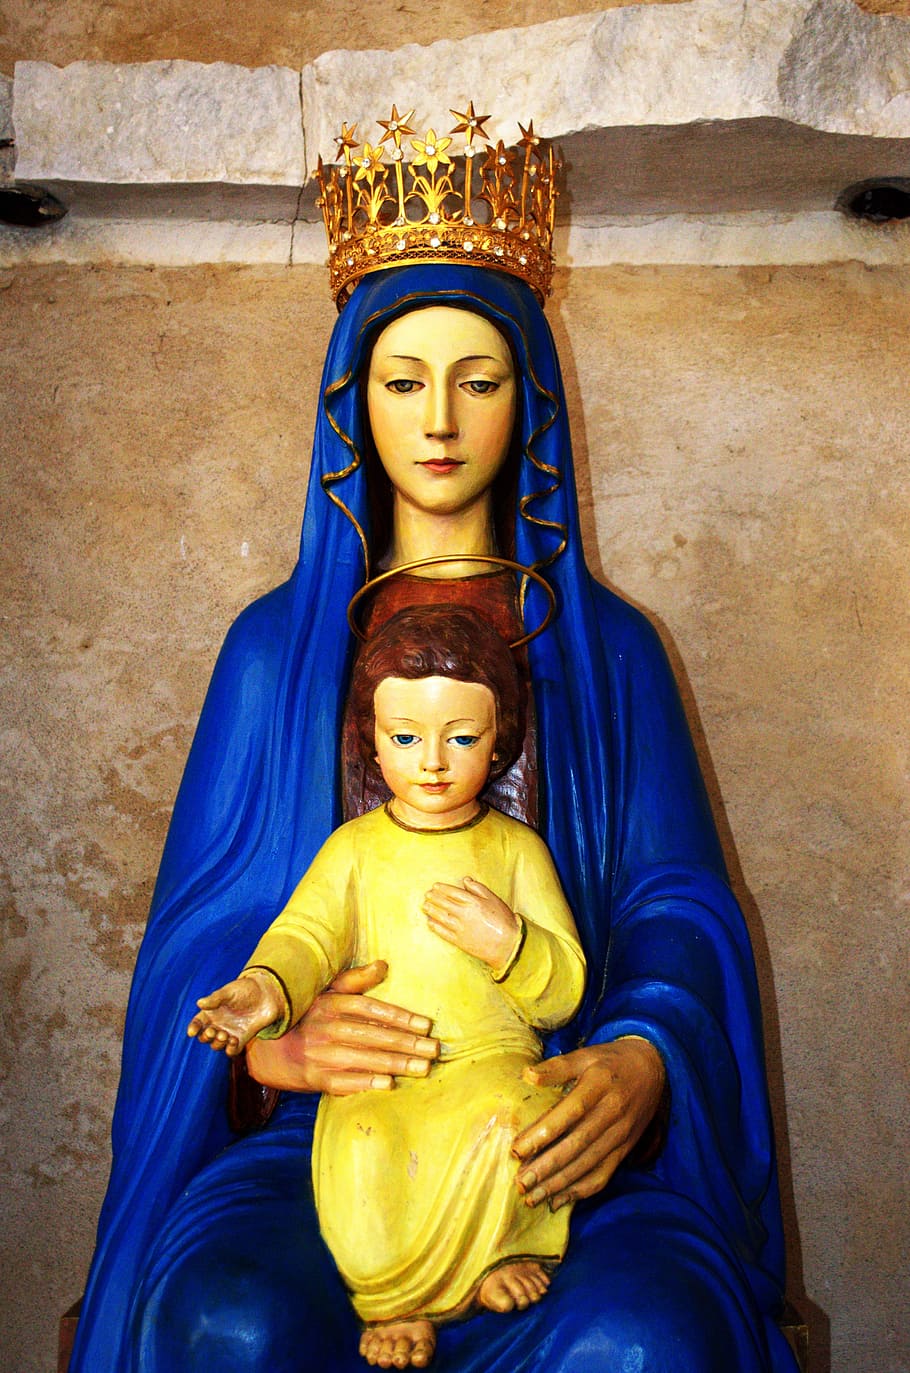 mother mary statue, madonna, statue, sculpture, figure, woman, mother of god, christianity, maria, faith